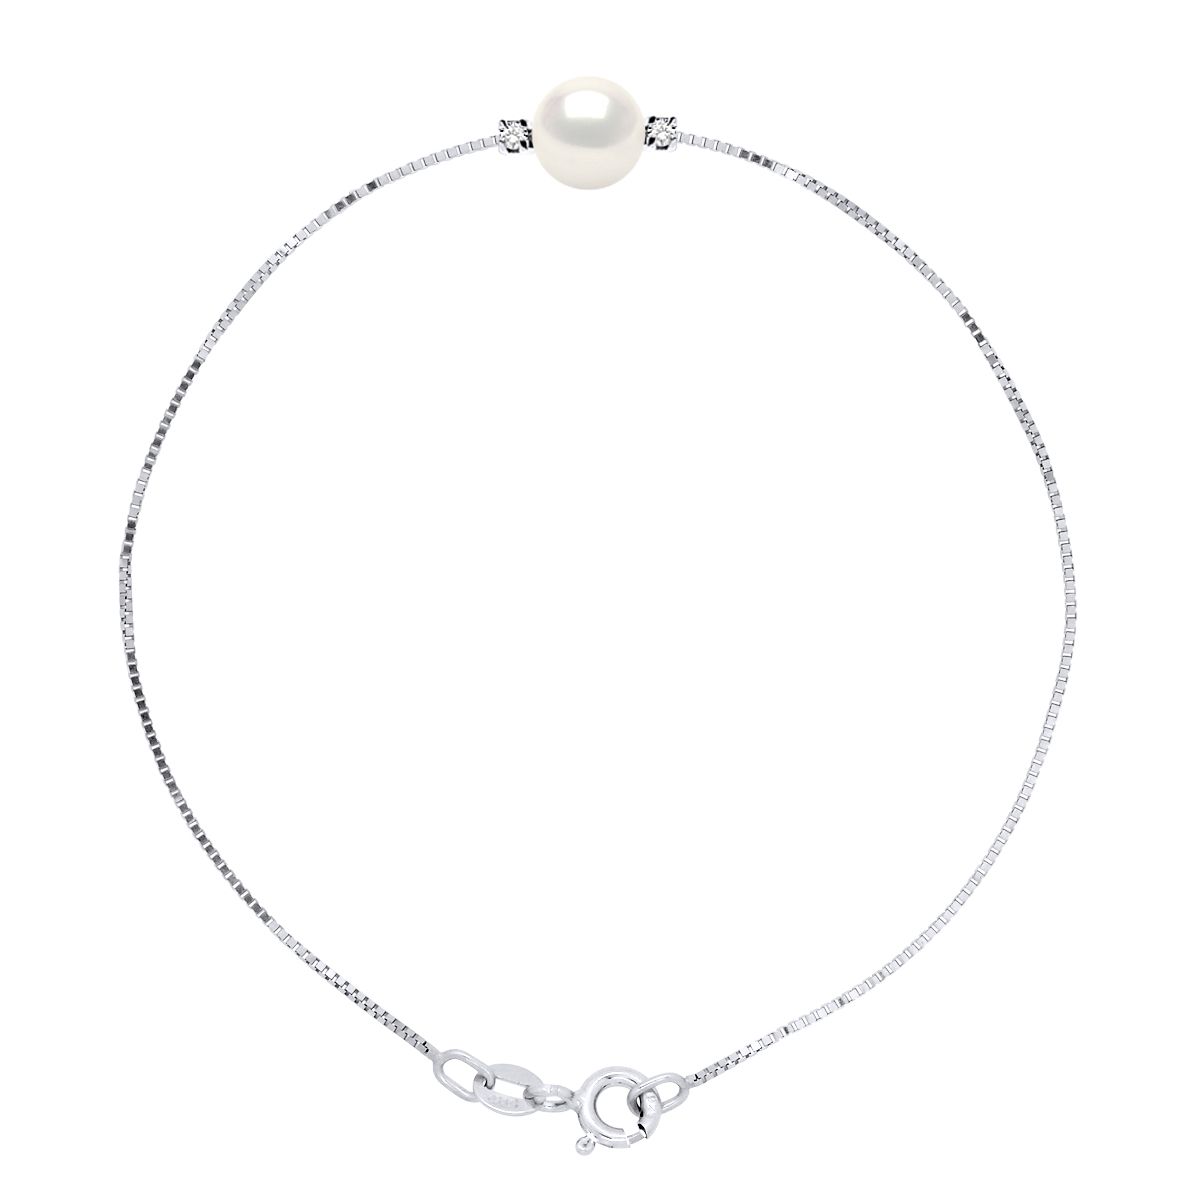 Bracelet Venetian stitch 925 Sterling Silver Rhodium-plated set with true Cultured Freshwater Round Pearl 8-9 mm surrounded by 2 true Diamonds 0,03 Cts -Length 18 cm, 7 in - Our jewellery is made in France and will be delivered in a gift box accompanied by a Certificate of Authenticity and International Warranty